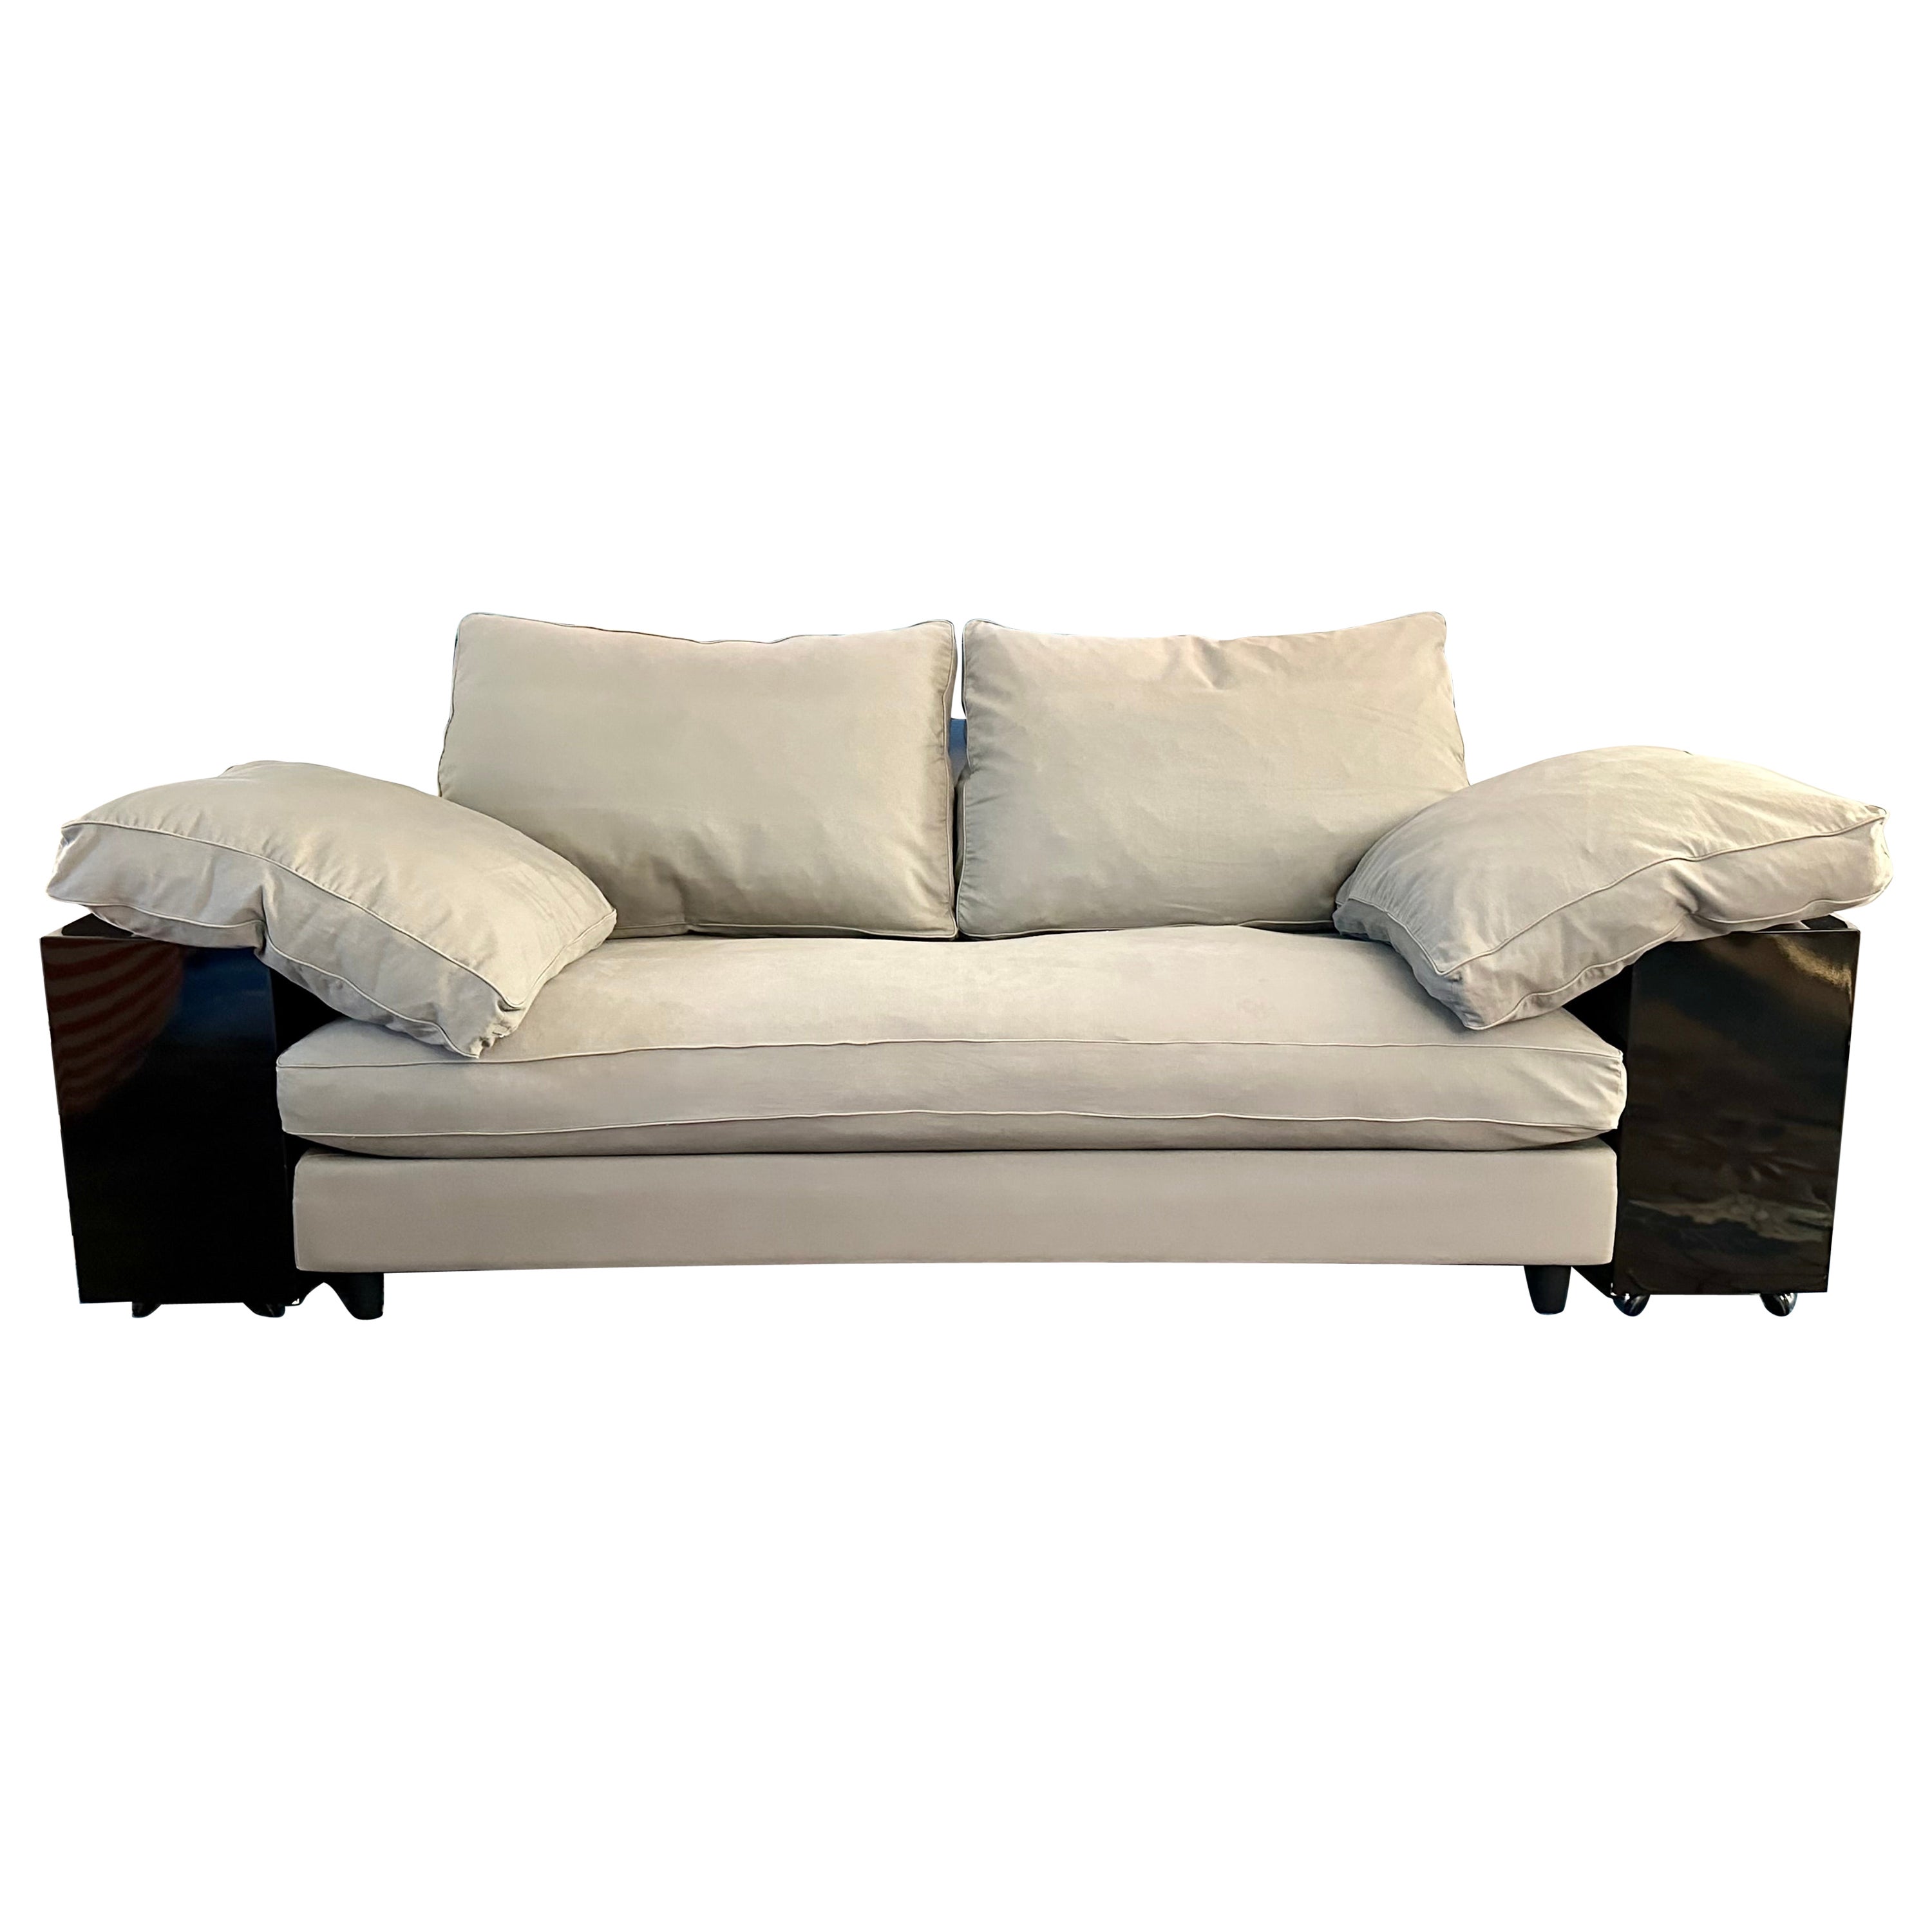 Eileen Gray "Lota" Sofa by Classico, Germany For Sale